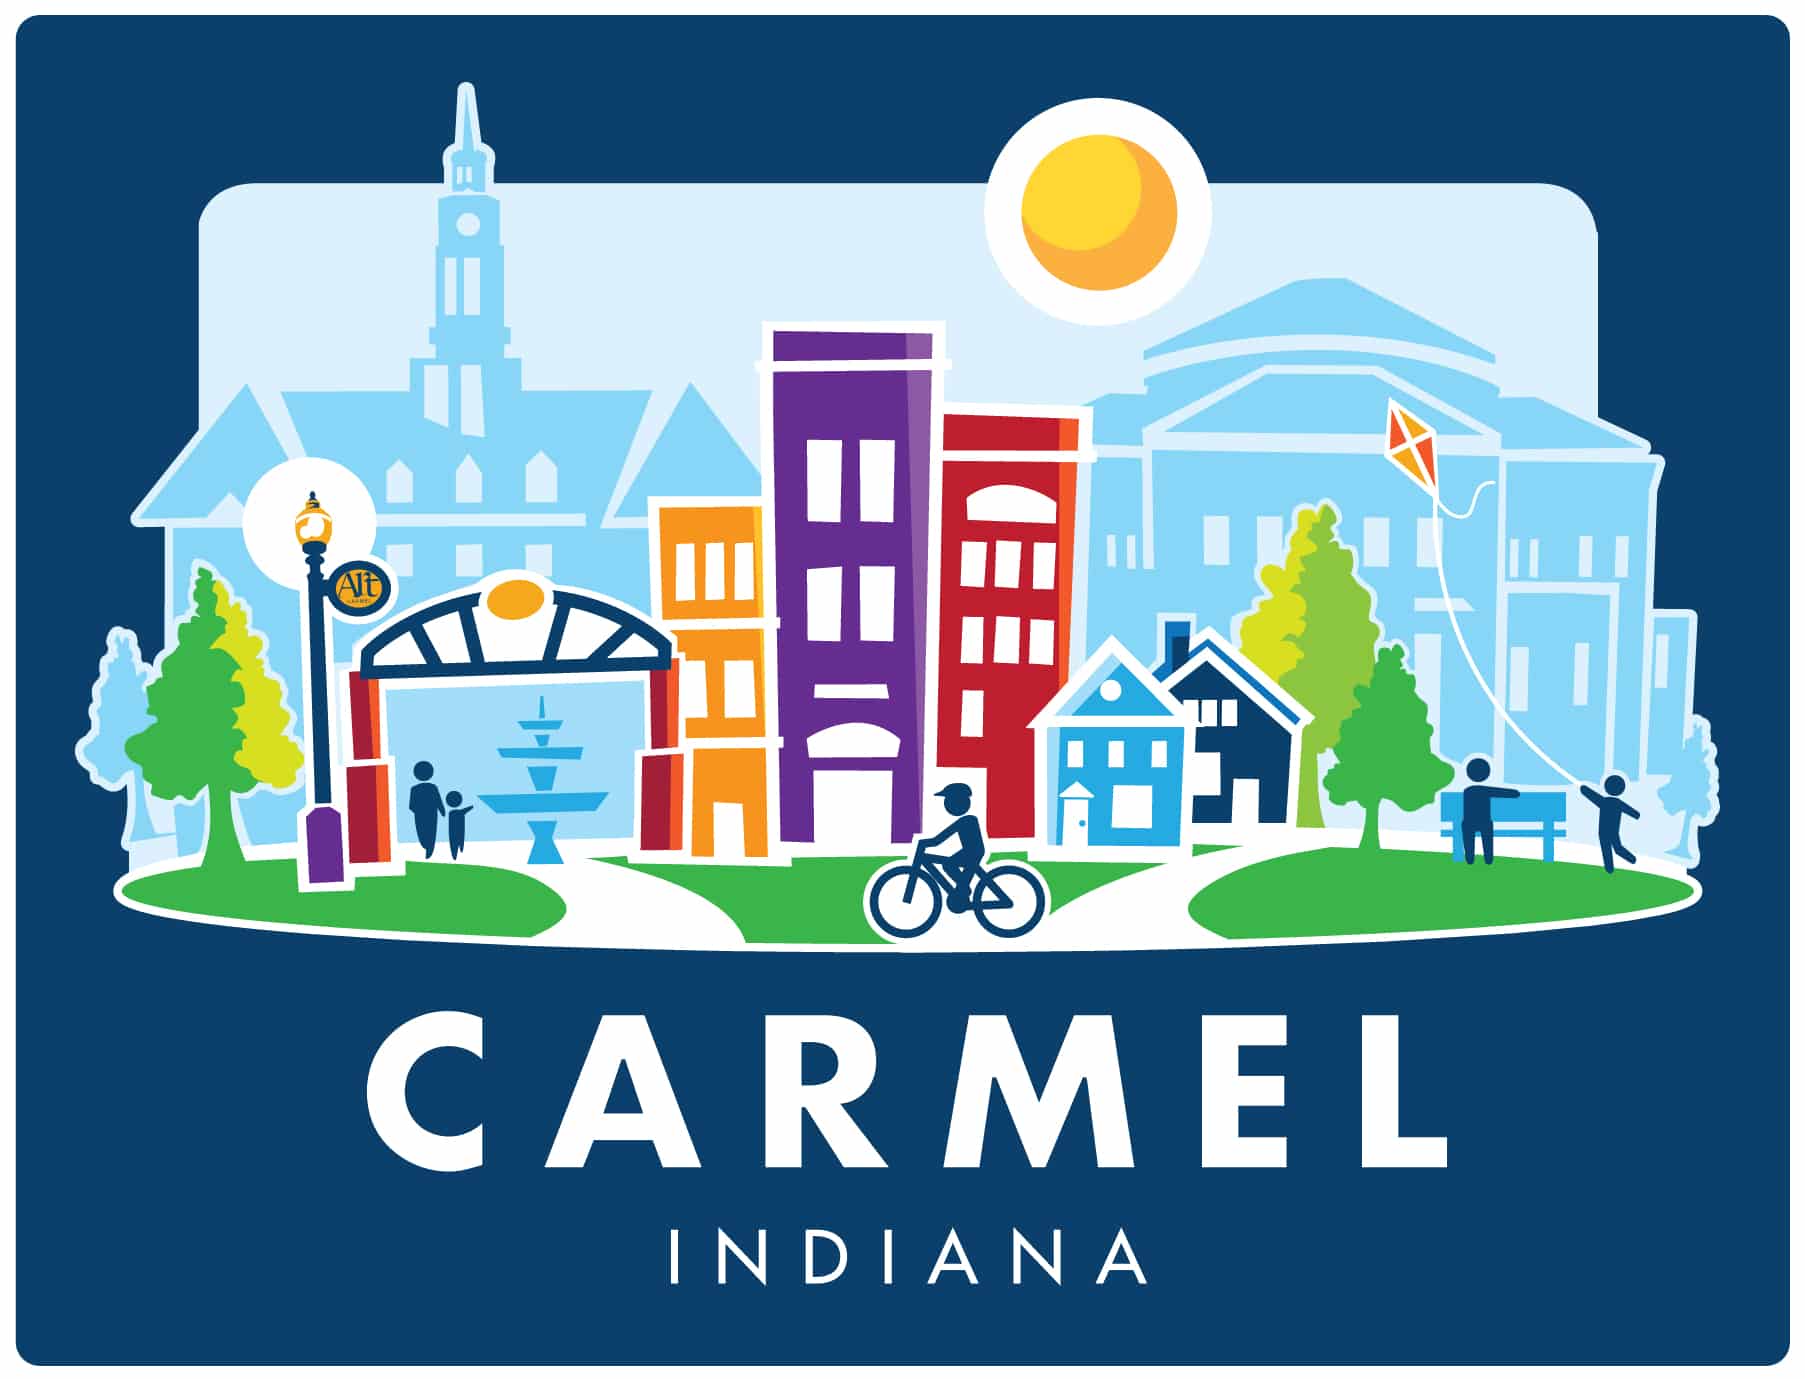 The logo for Carmel, Indiana, representing Indianapolis Custom Homes and New Homes.